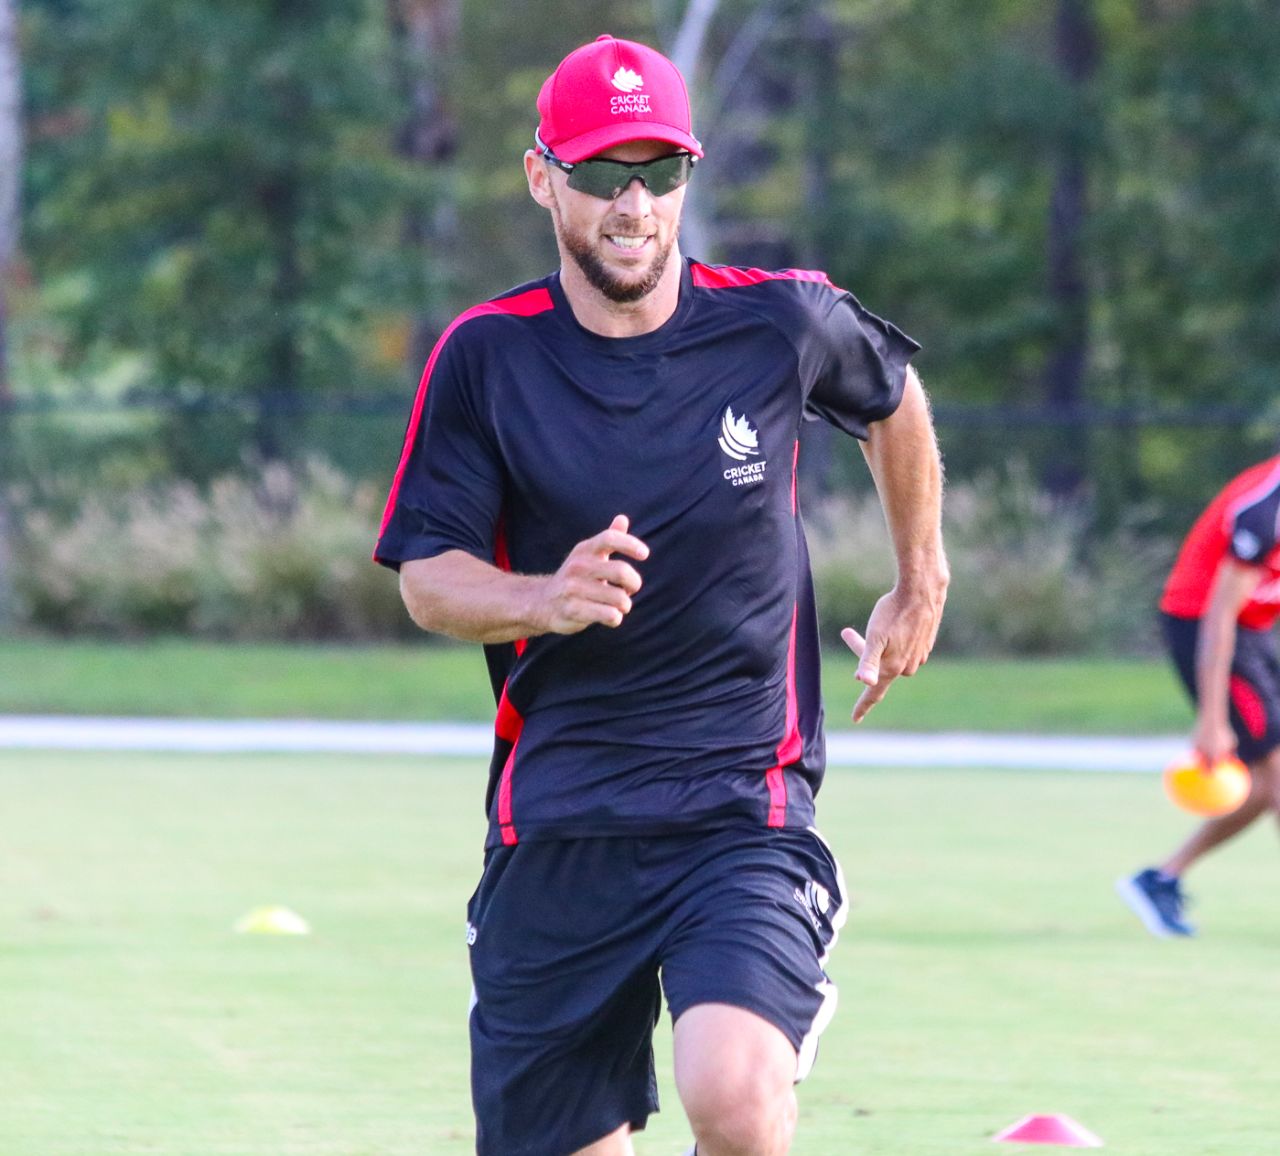 Davy Jacobs goes through a warm-up sprint in a Canada training session, Morrisville, September 19, 2018